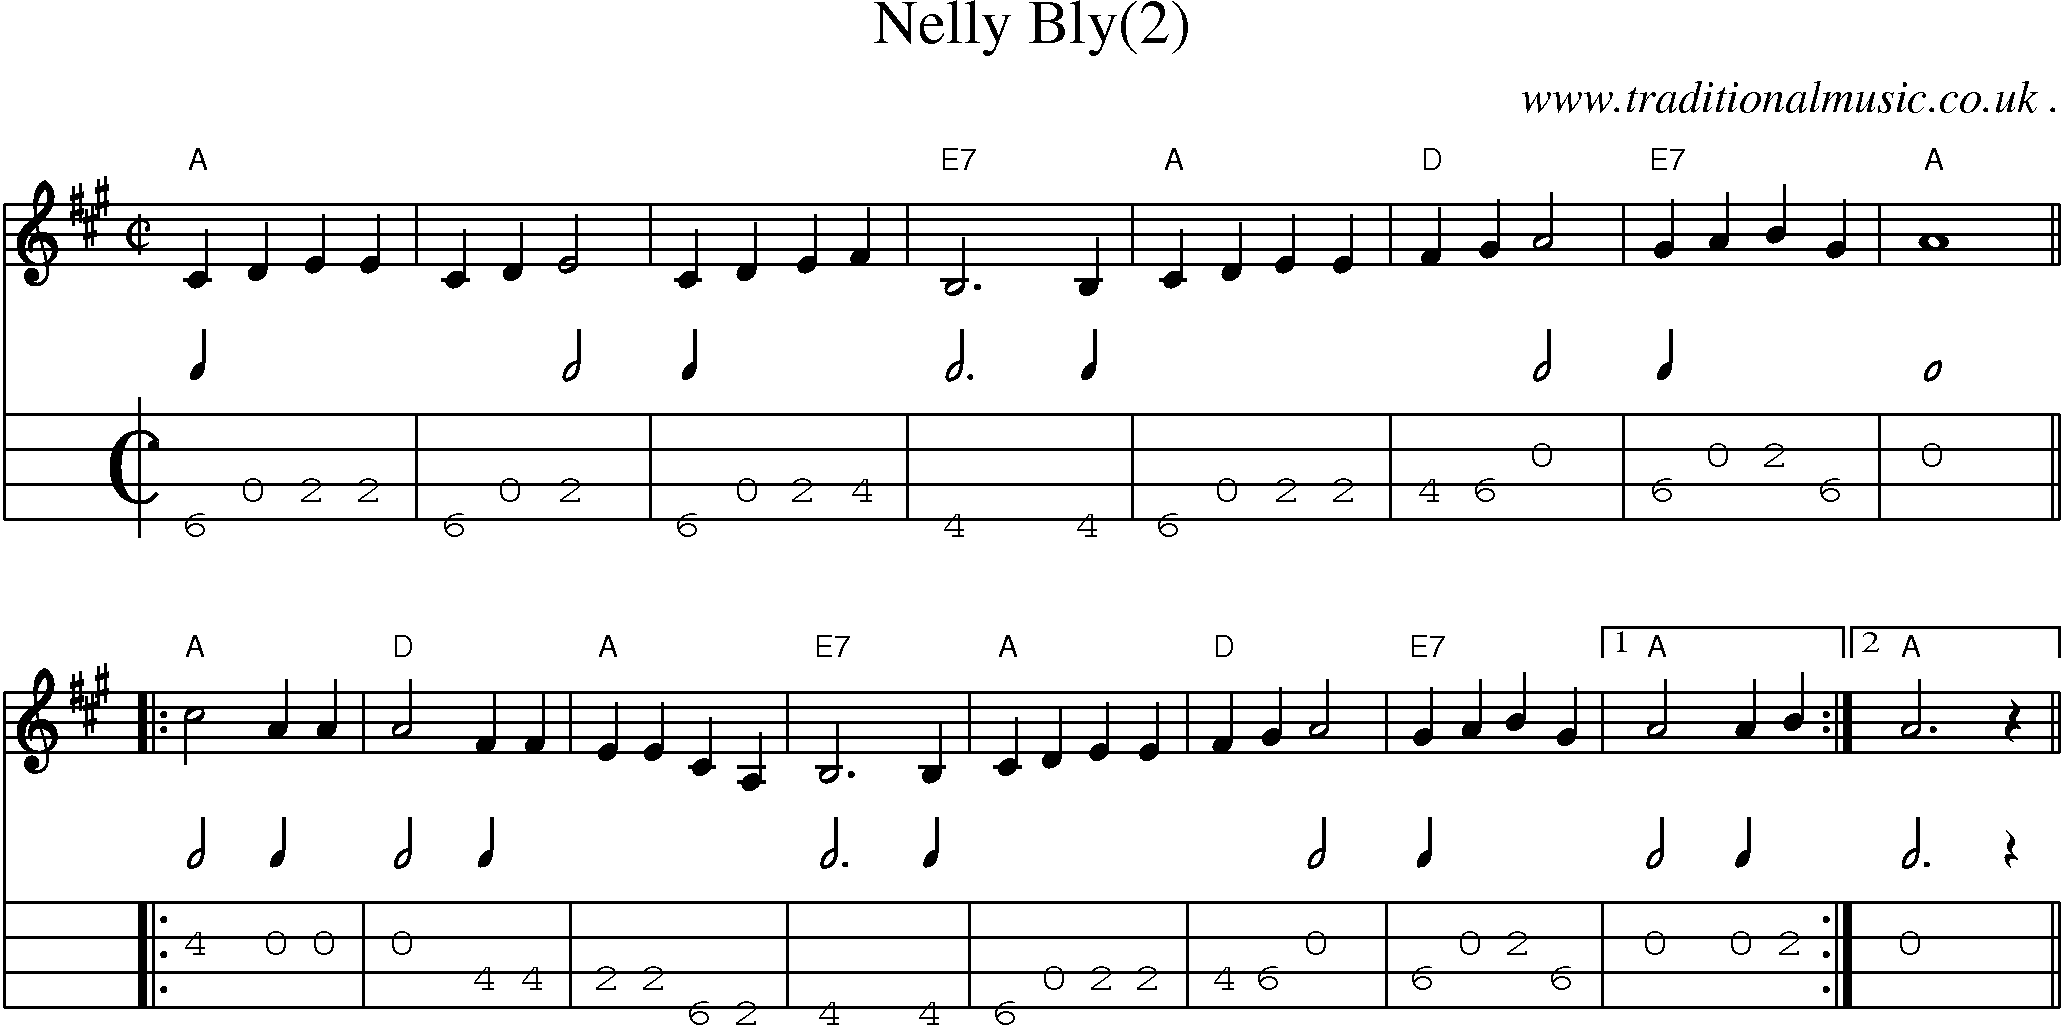 Music Score and Mandolin Tabs for Nelly Bly(2)